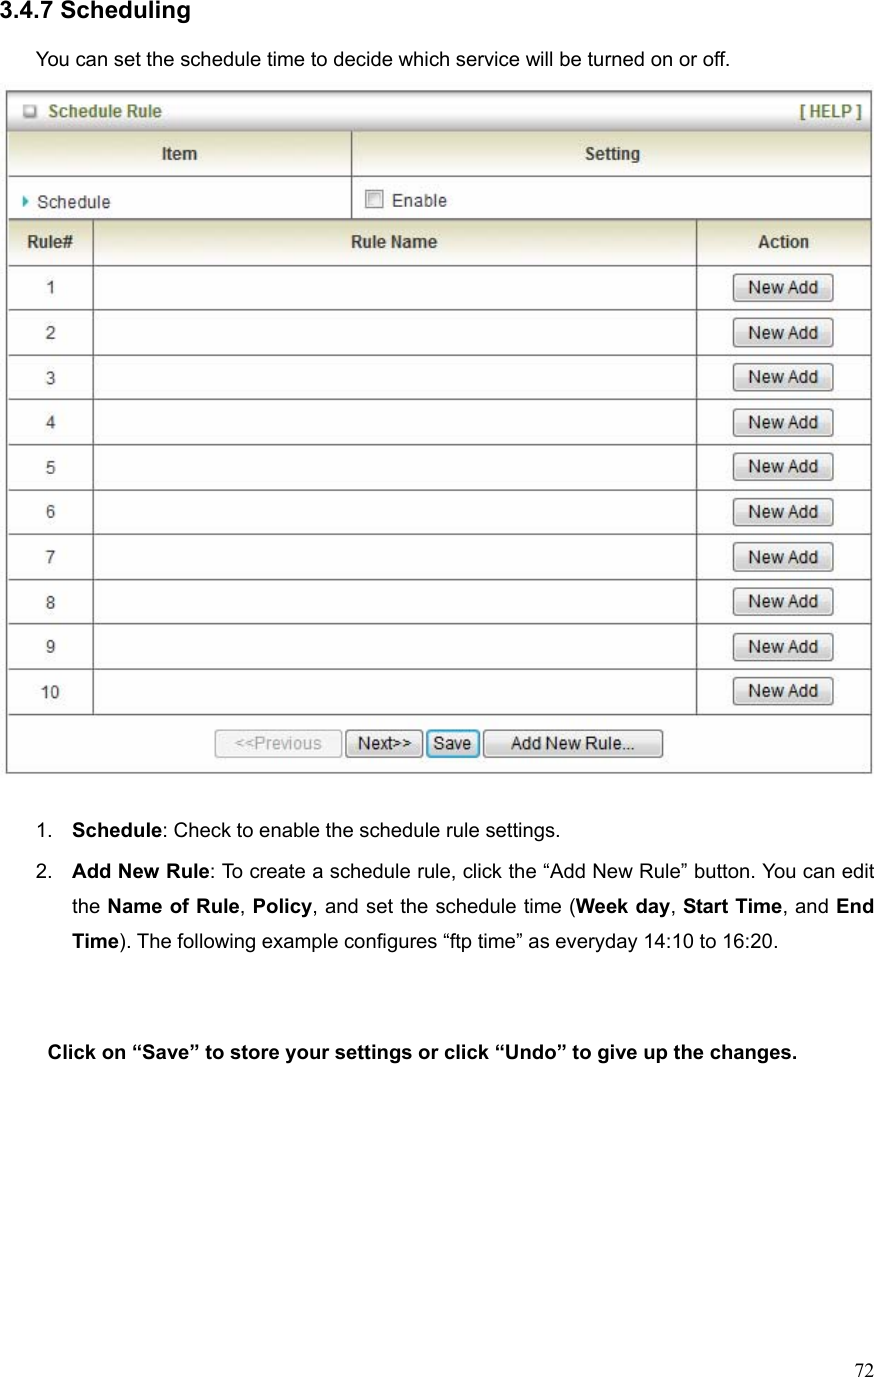  723.4.7 Scheduling  You can set the schedule time to decide which service will be turned on or off.     1.  Schedule: Check to enable the schedule rule settings.   2.  Add New Rule: To create a schedule rule, click the “Add New Rule” button. You can edit the Name of Rule, Policy, and set the schedule time (Week day, Start Time, and End Time). The following example configures “ftp time” as everyday 14:10 to 16:20.    Click on “Save” to store your settings or click “Undo” to give up the changes.       